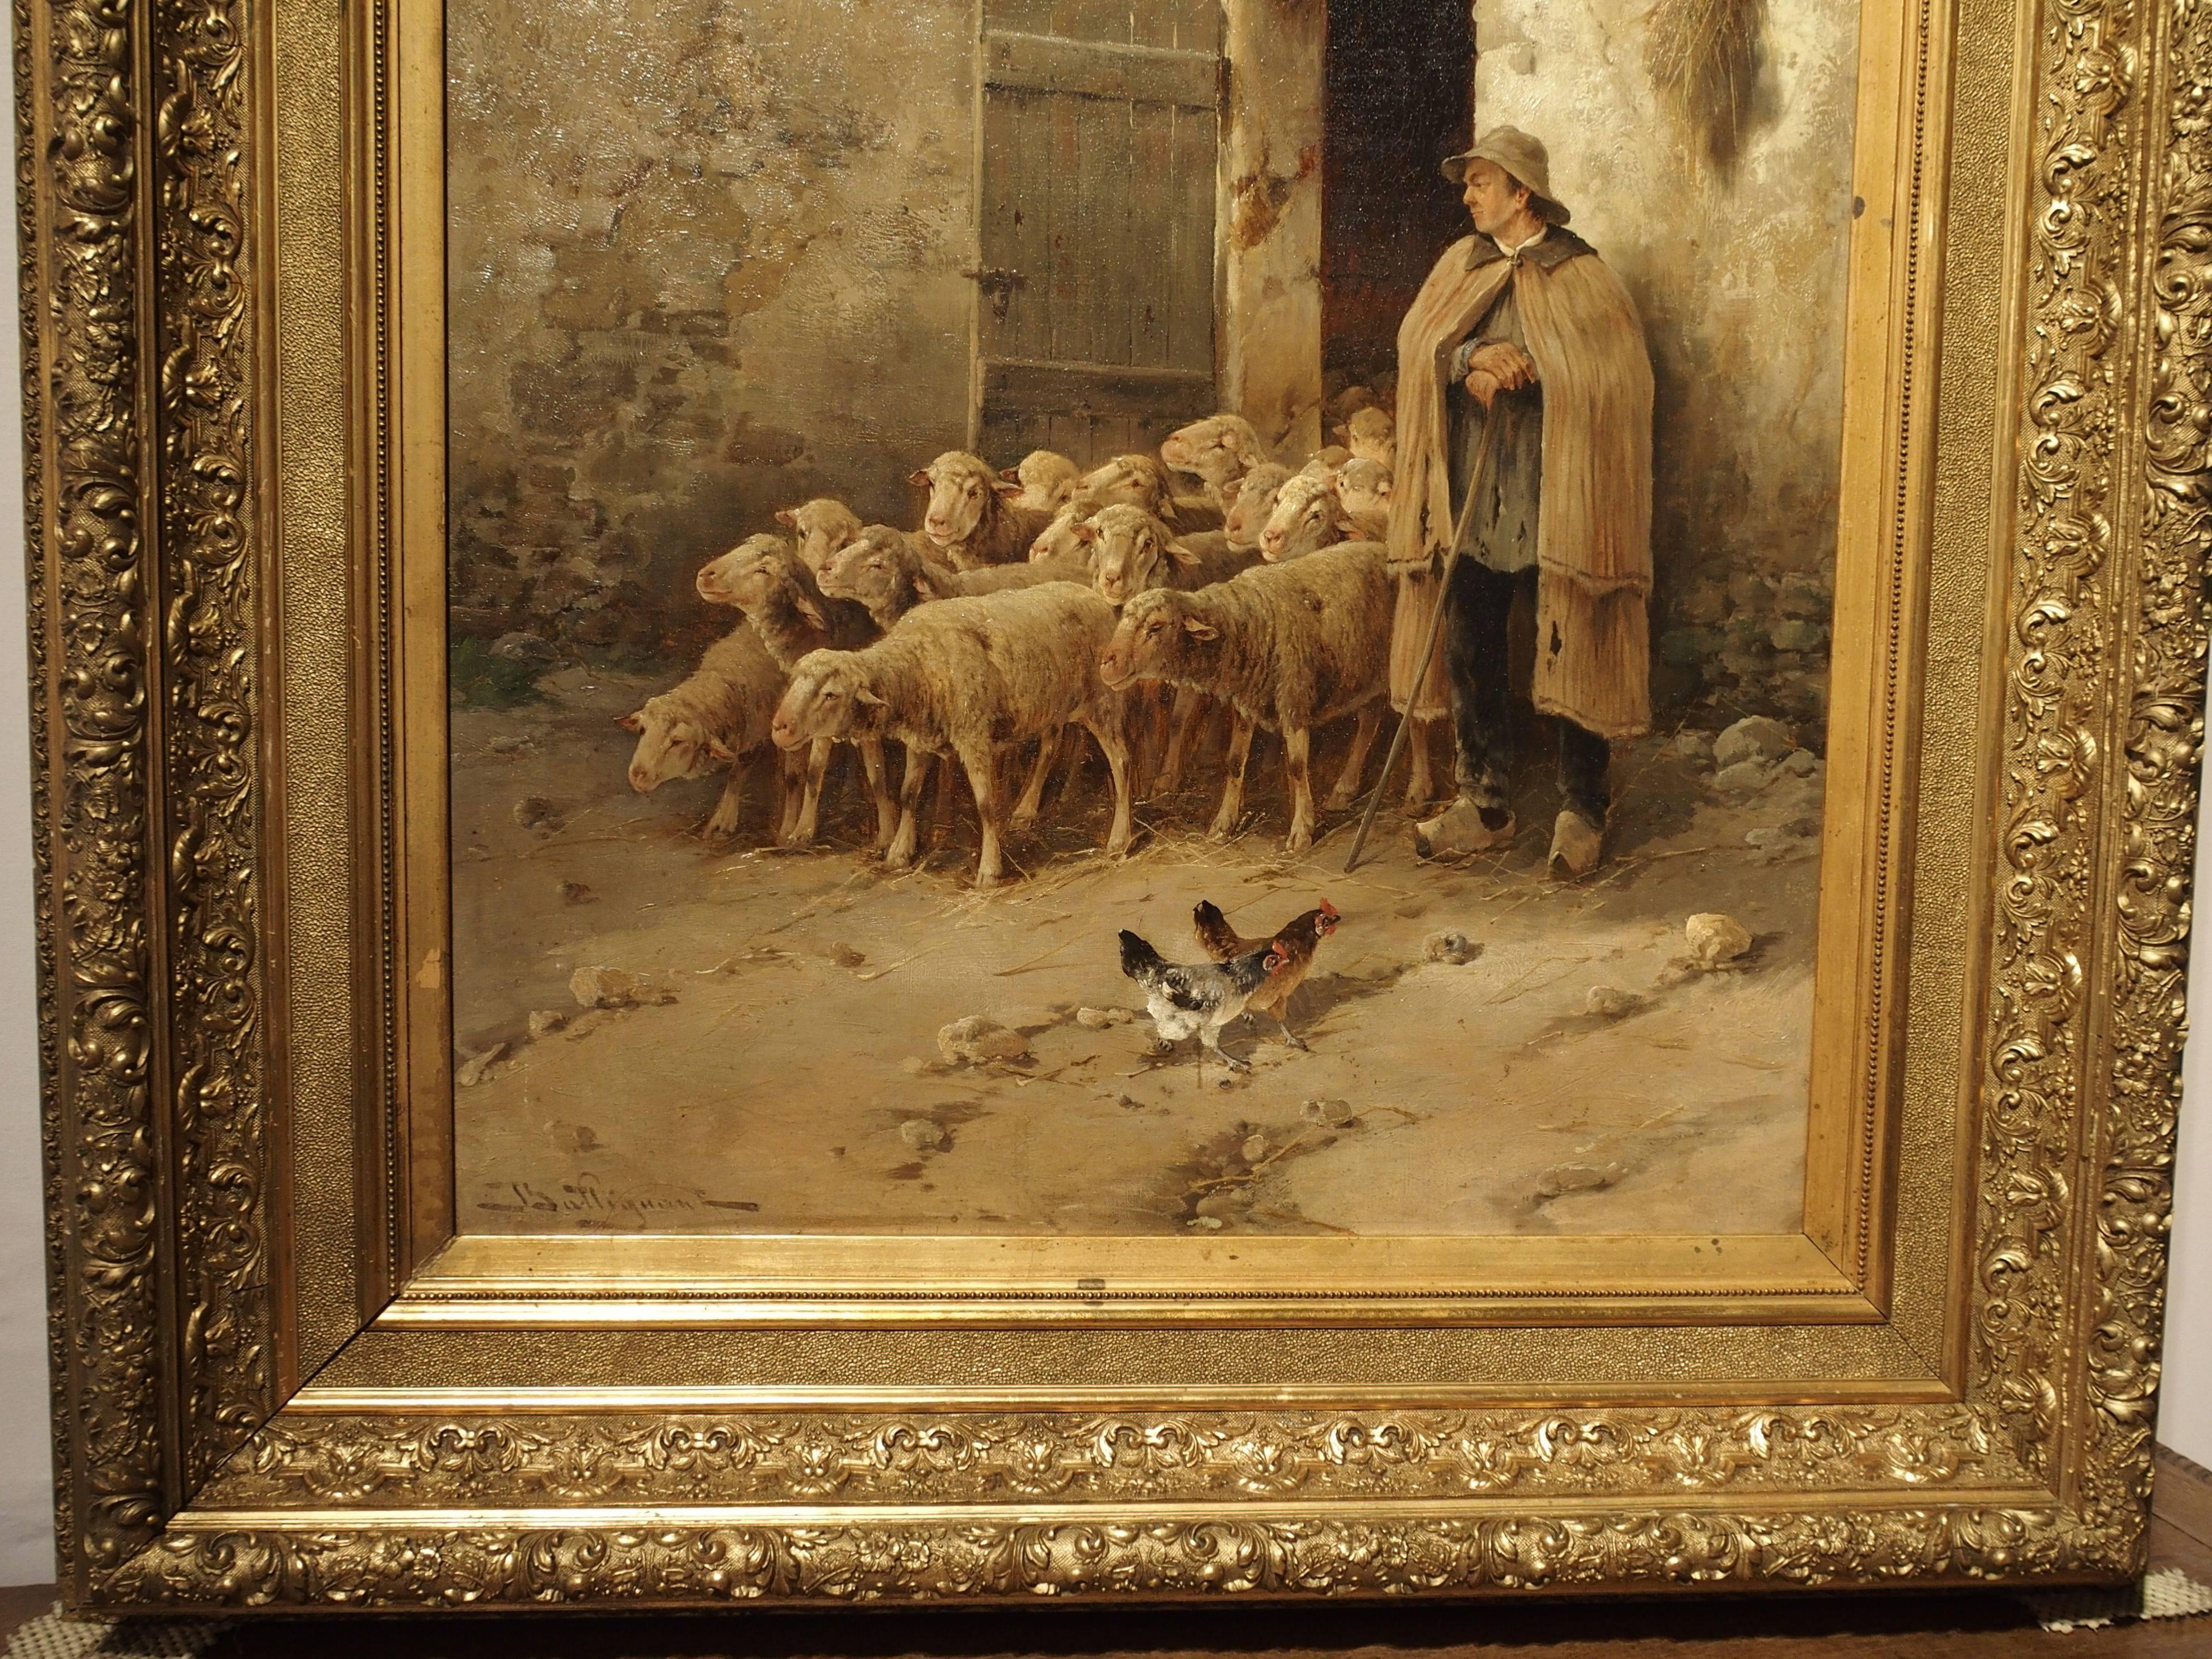 This peaceful genre style oil painting depicts a farmyard scene with chickens and sheep coming out of the barn for their exercise in the yard. The gentleman waits for the herd to completely exit before closing the door. At the top left corner of the